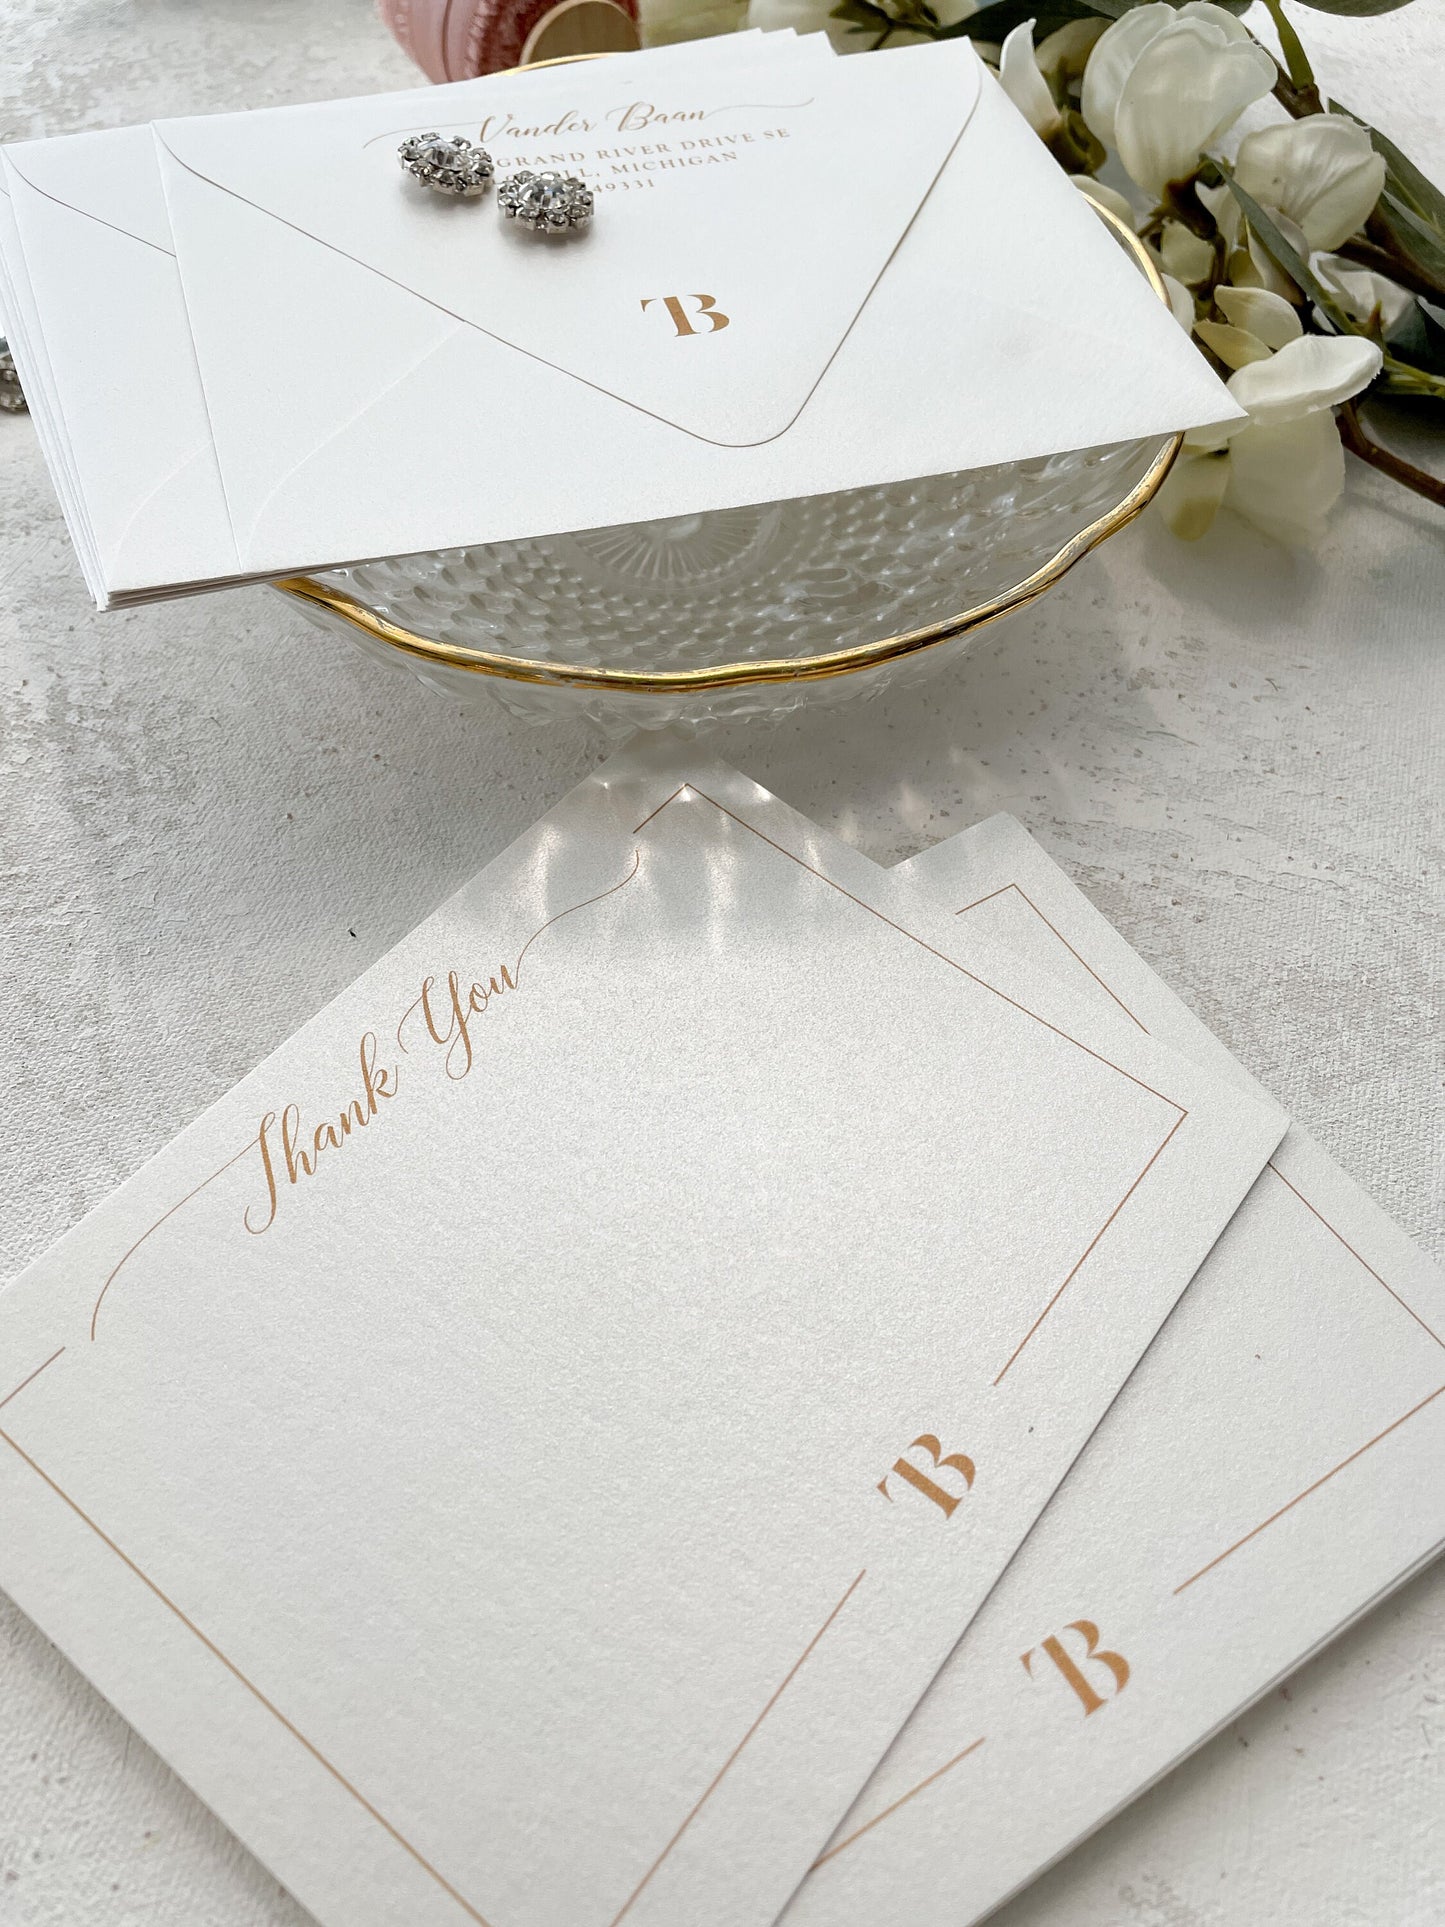 Premium Thank You Cards | Stationery Set | Notecard Set | Personalized Notecards | Stationery Gift - Set of 50 Style 211